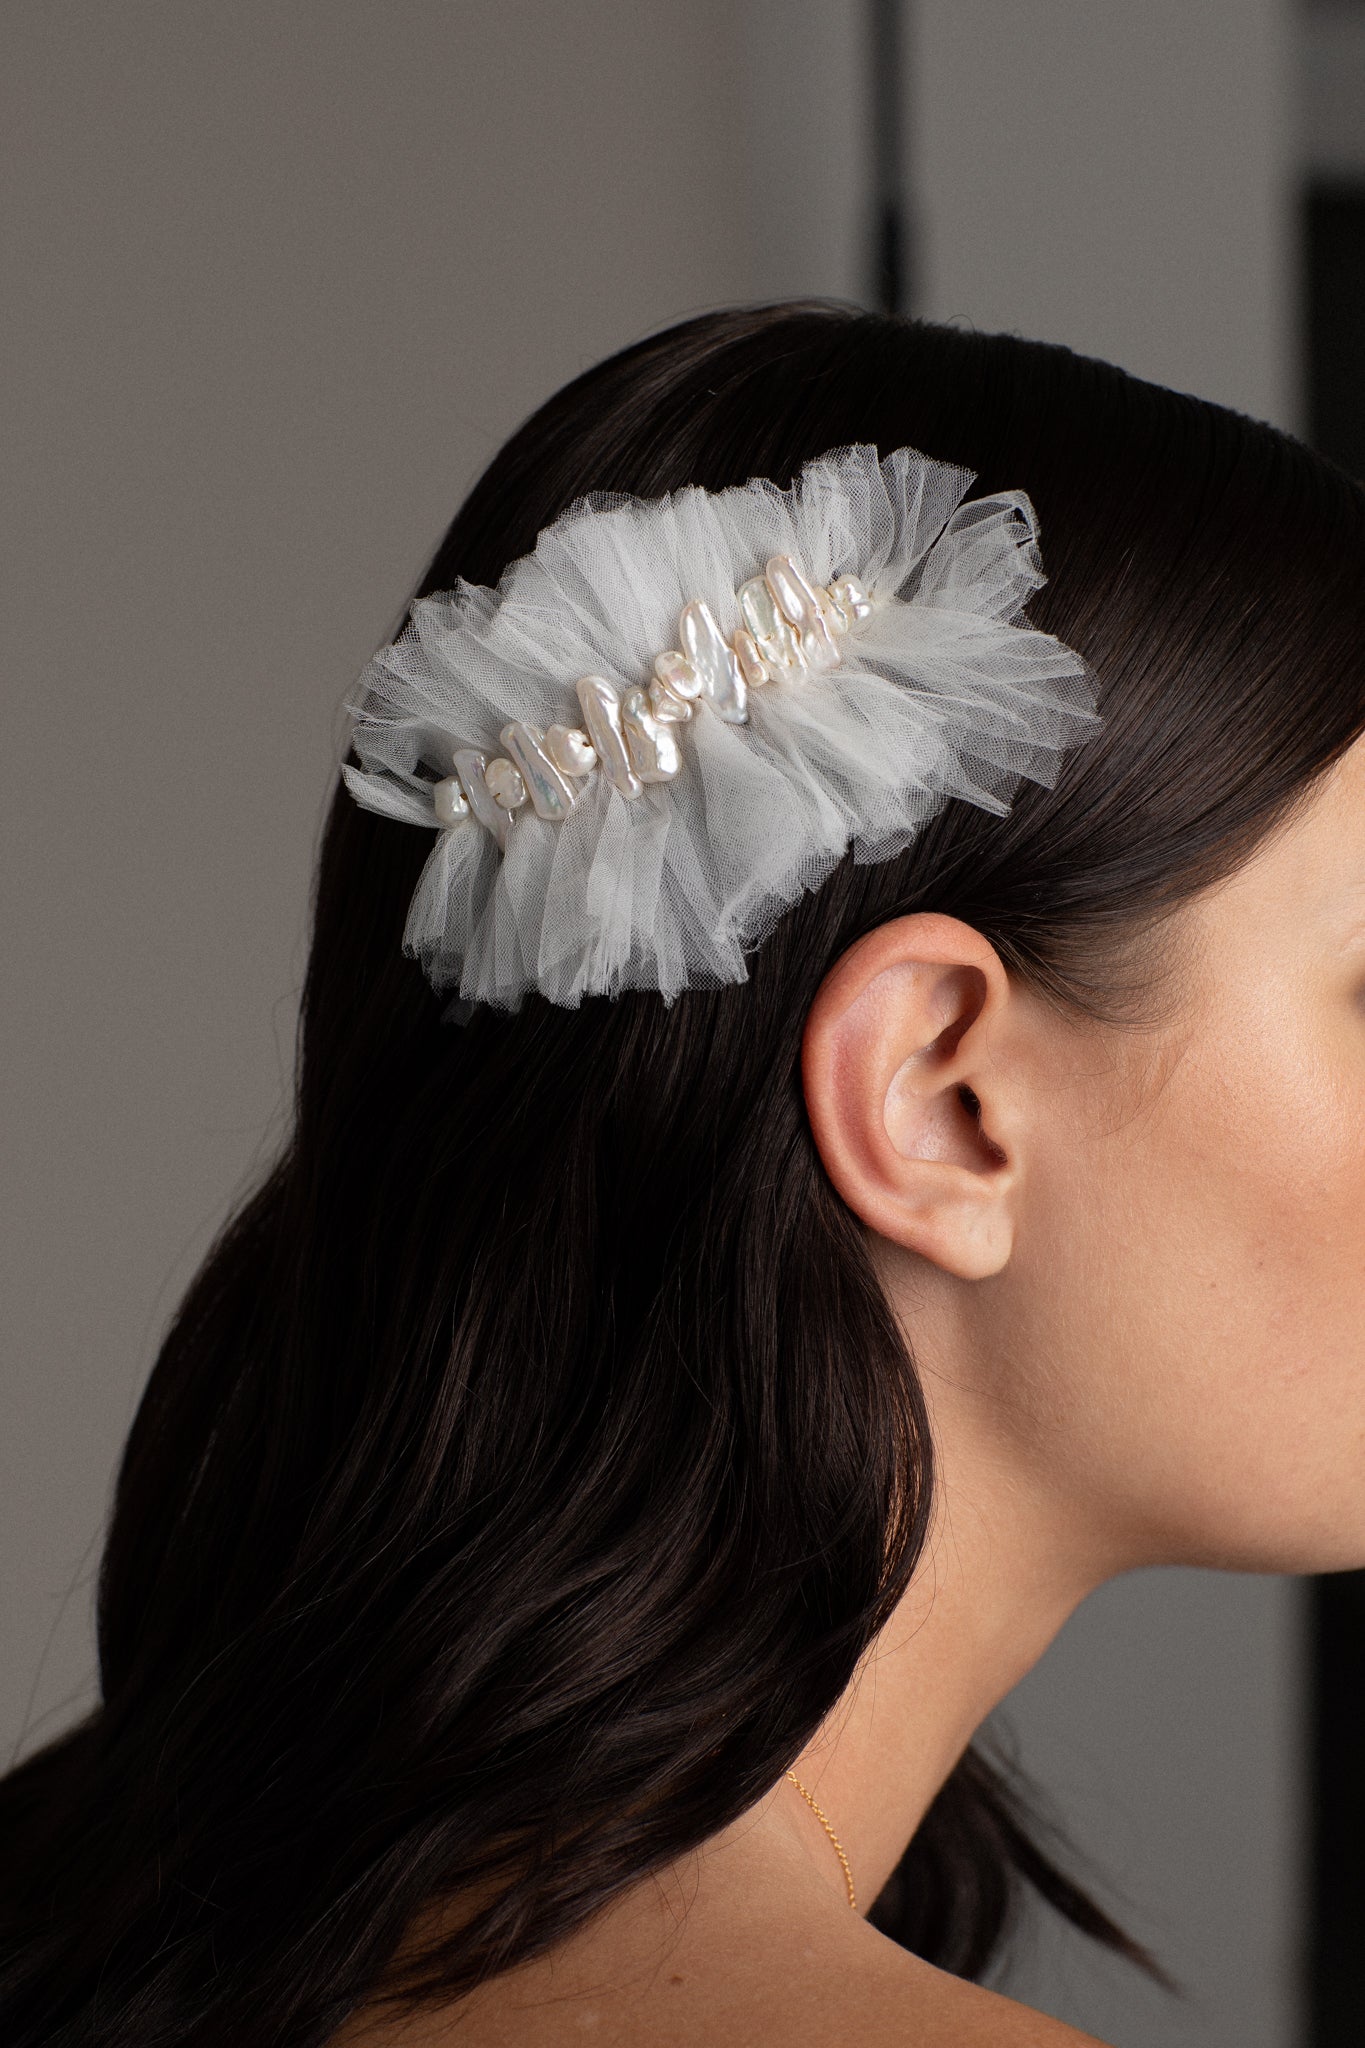 Crafted with tulle and adorned with freshwater keishi pearls, this comb brings a unique charm to any hairstyle.